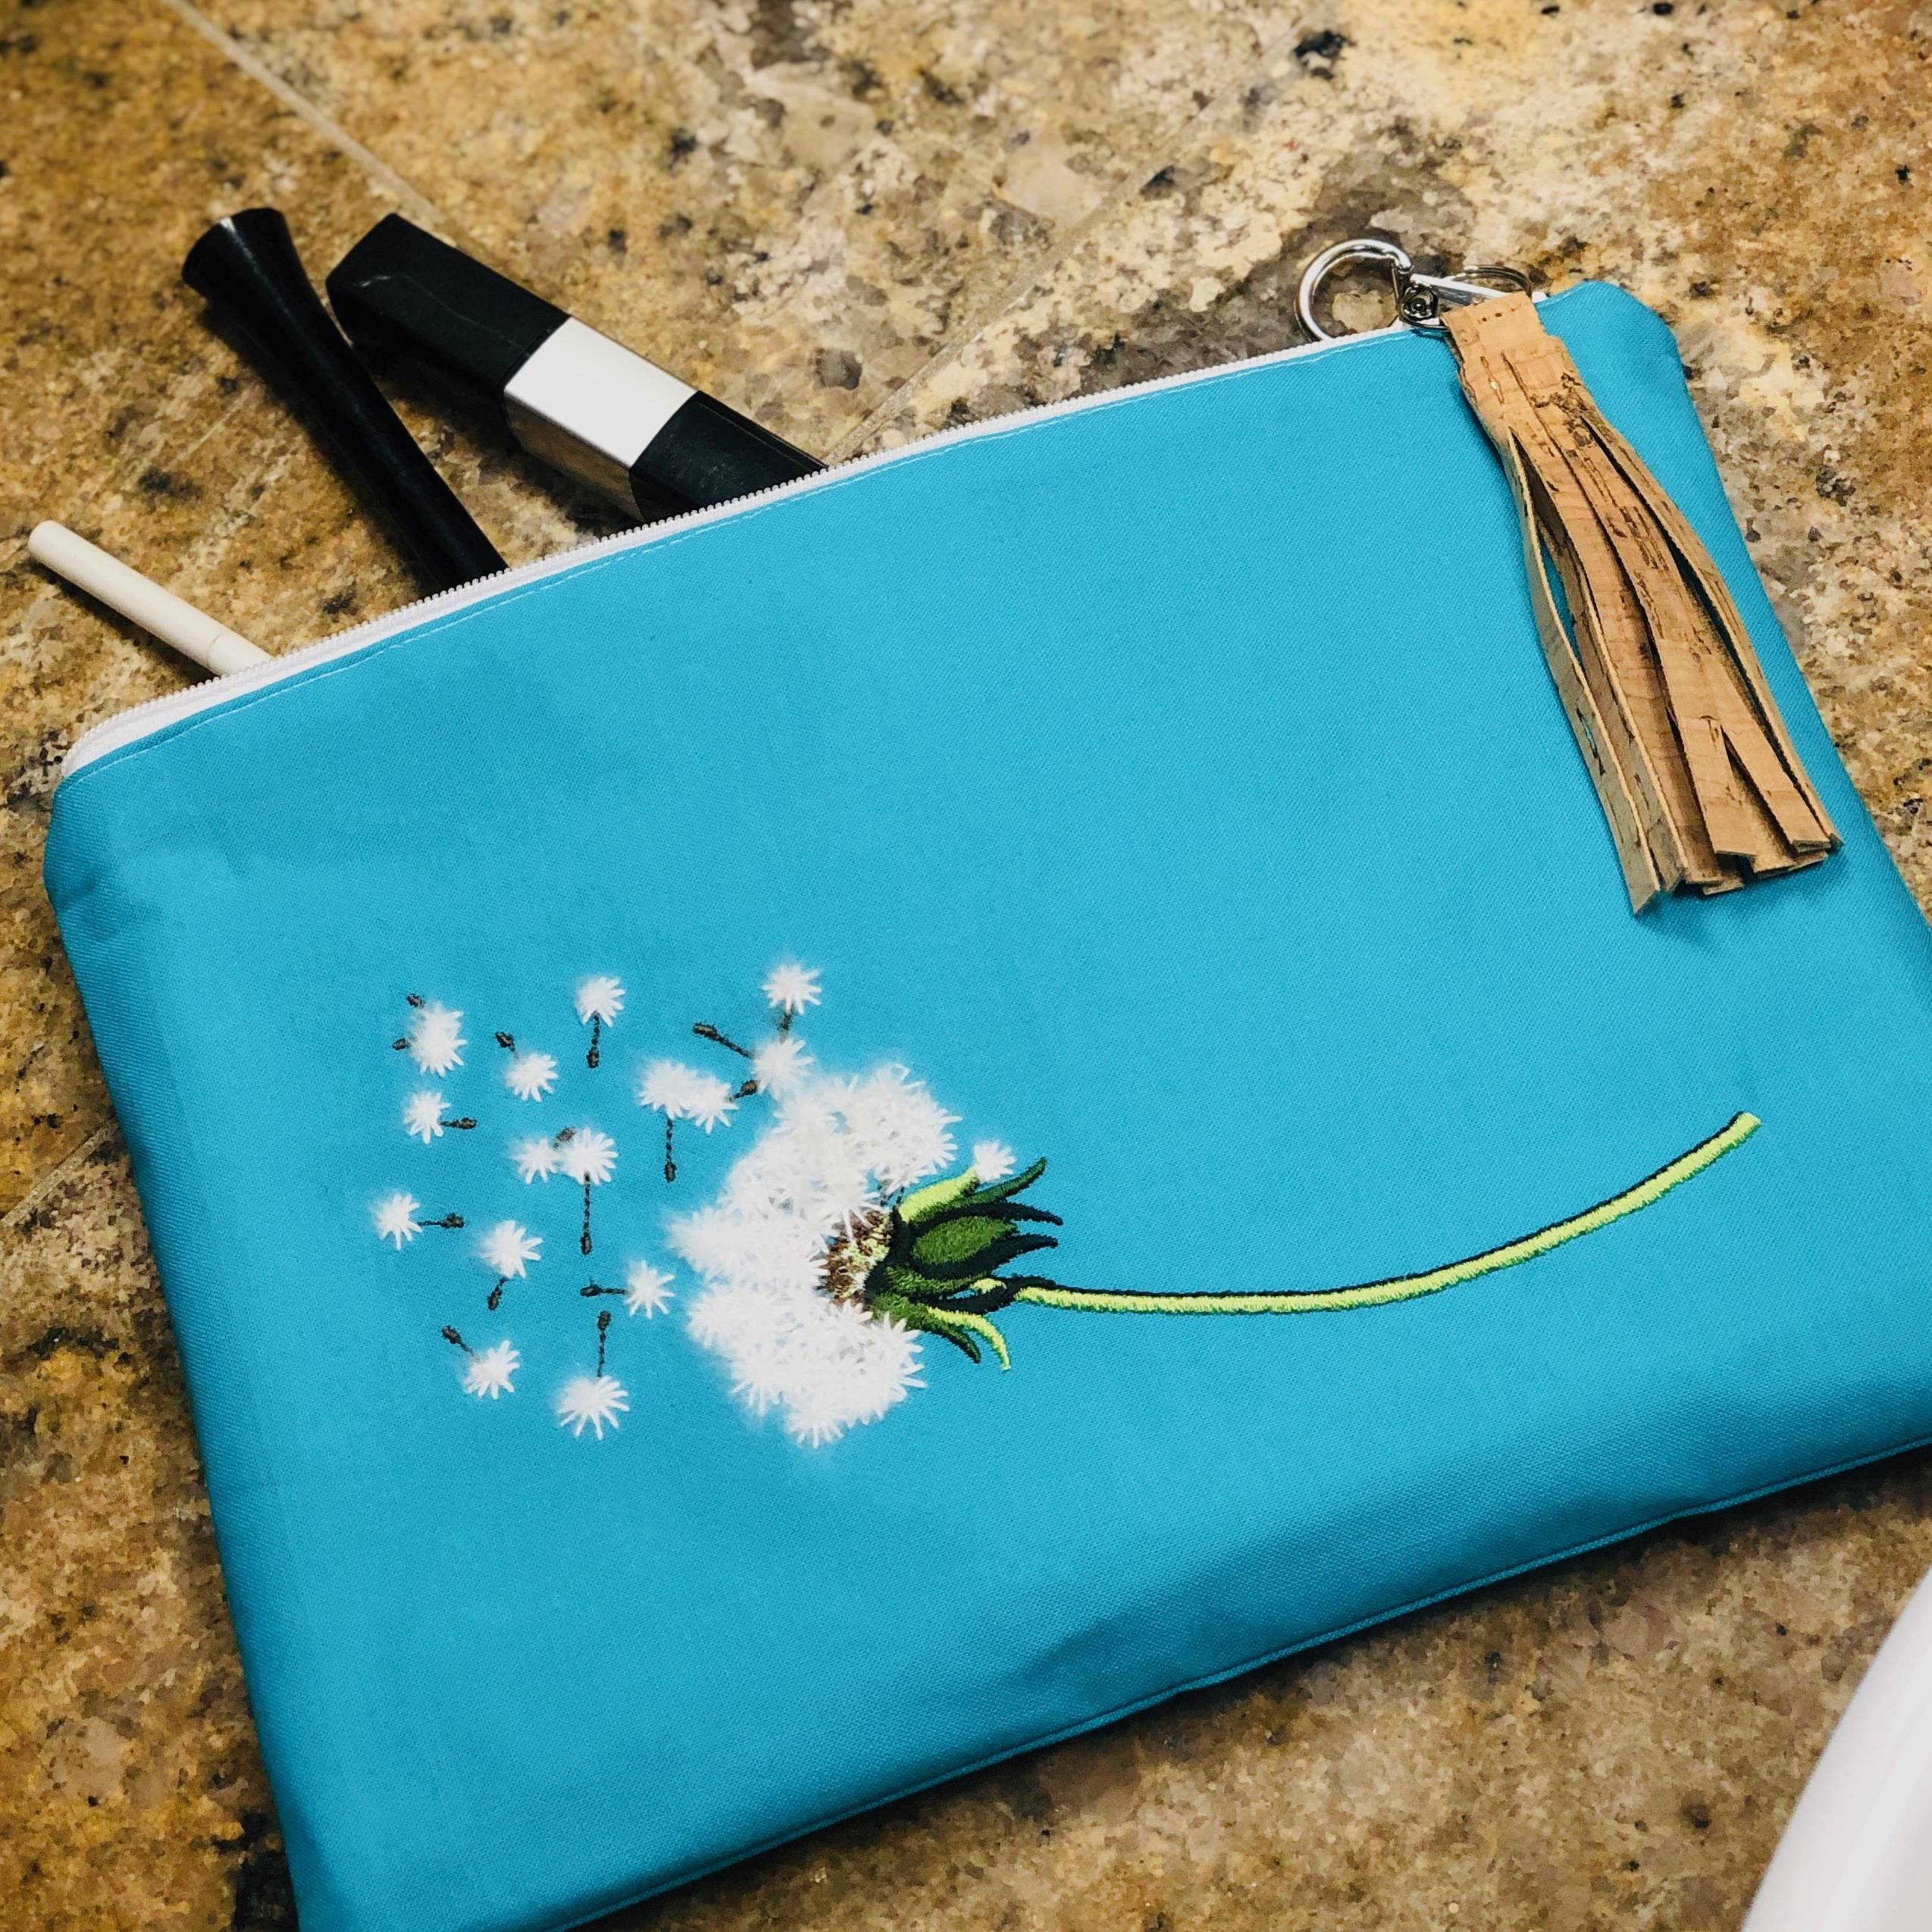 How to Sew a Zipper Pouch